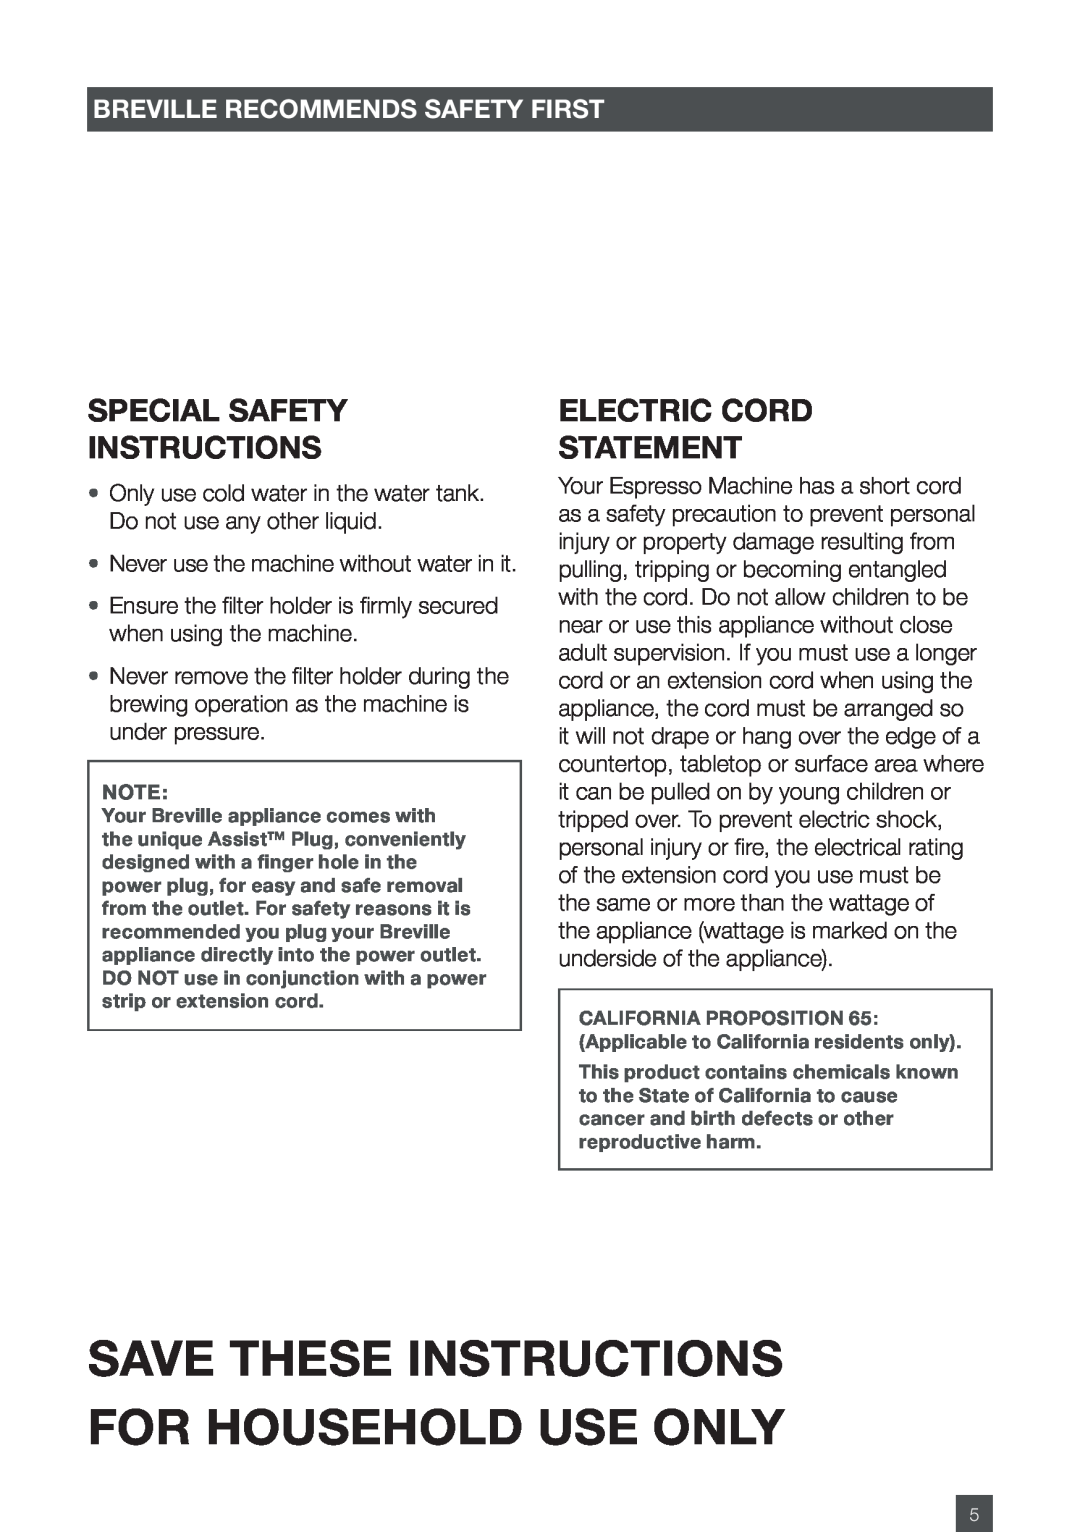 Breville ES6SXL /A Save These Instructions For Household Use Only, Special Safety Instructions, Electric Cord Statement 